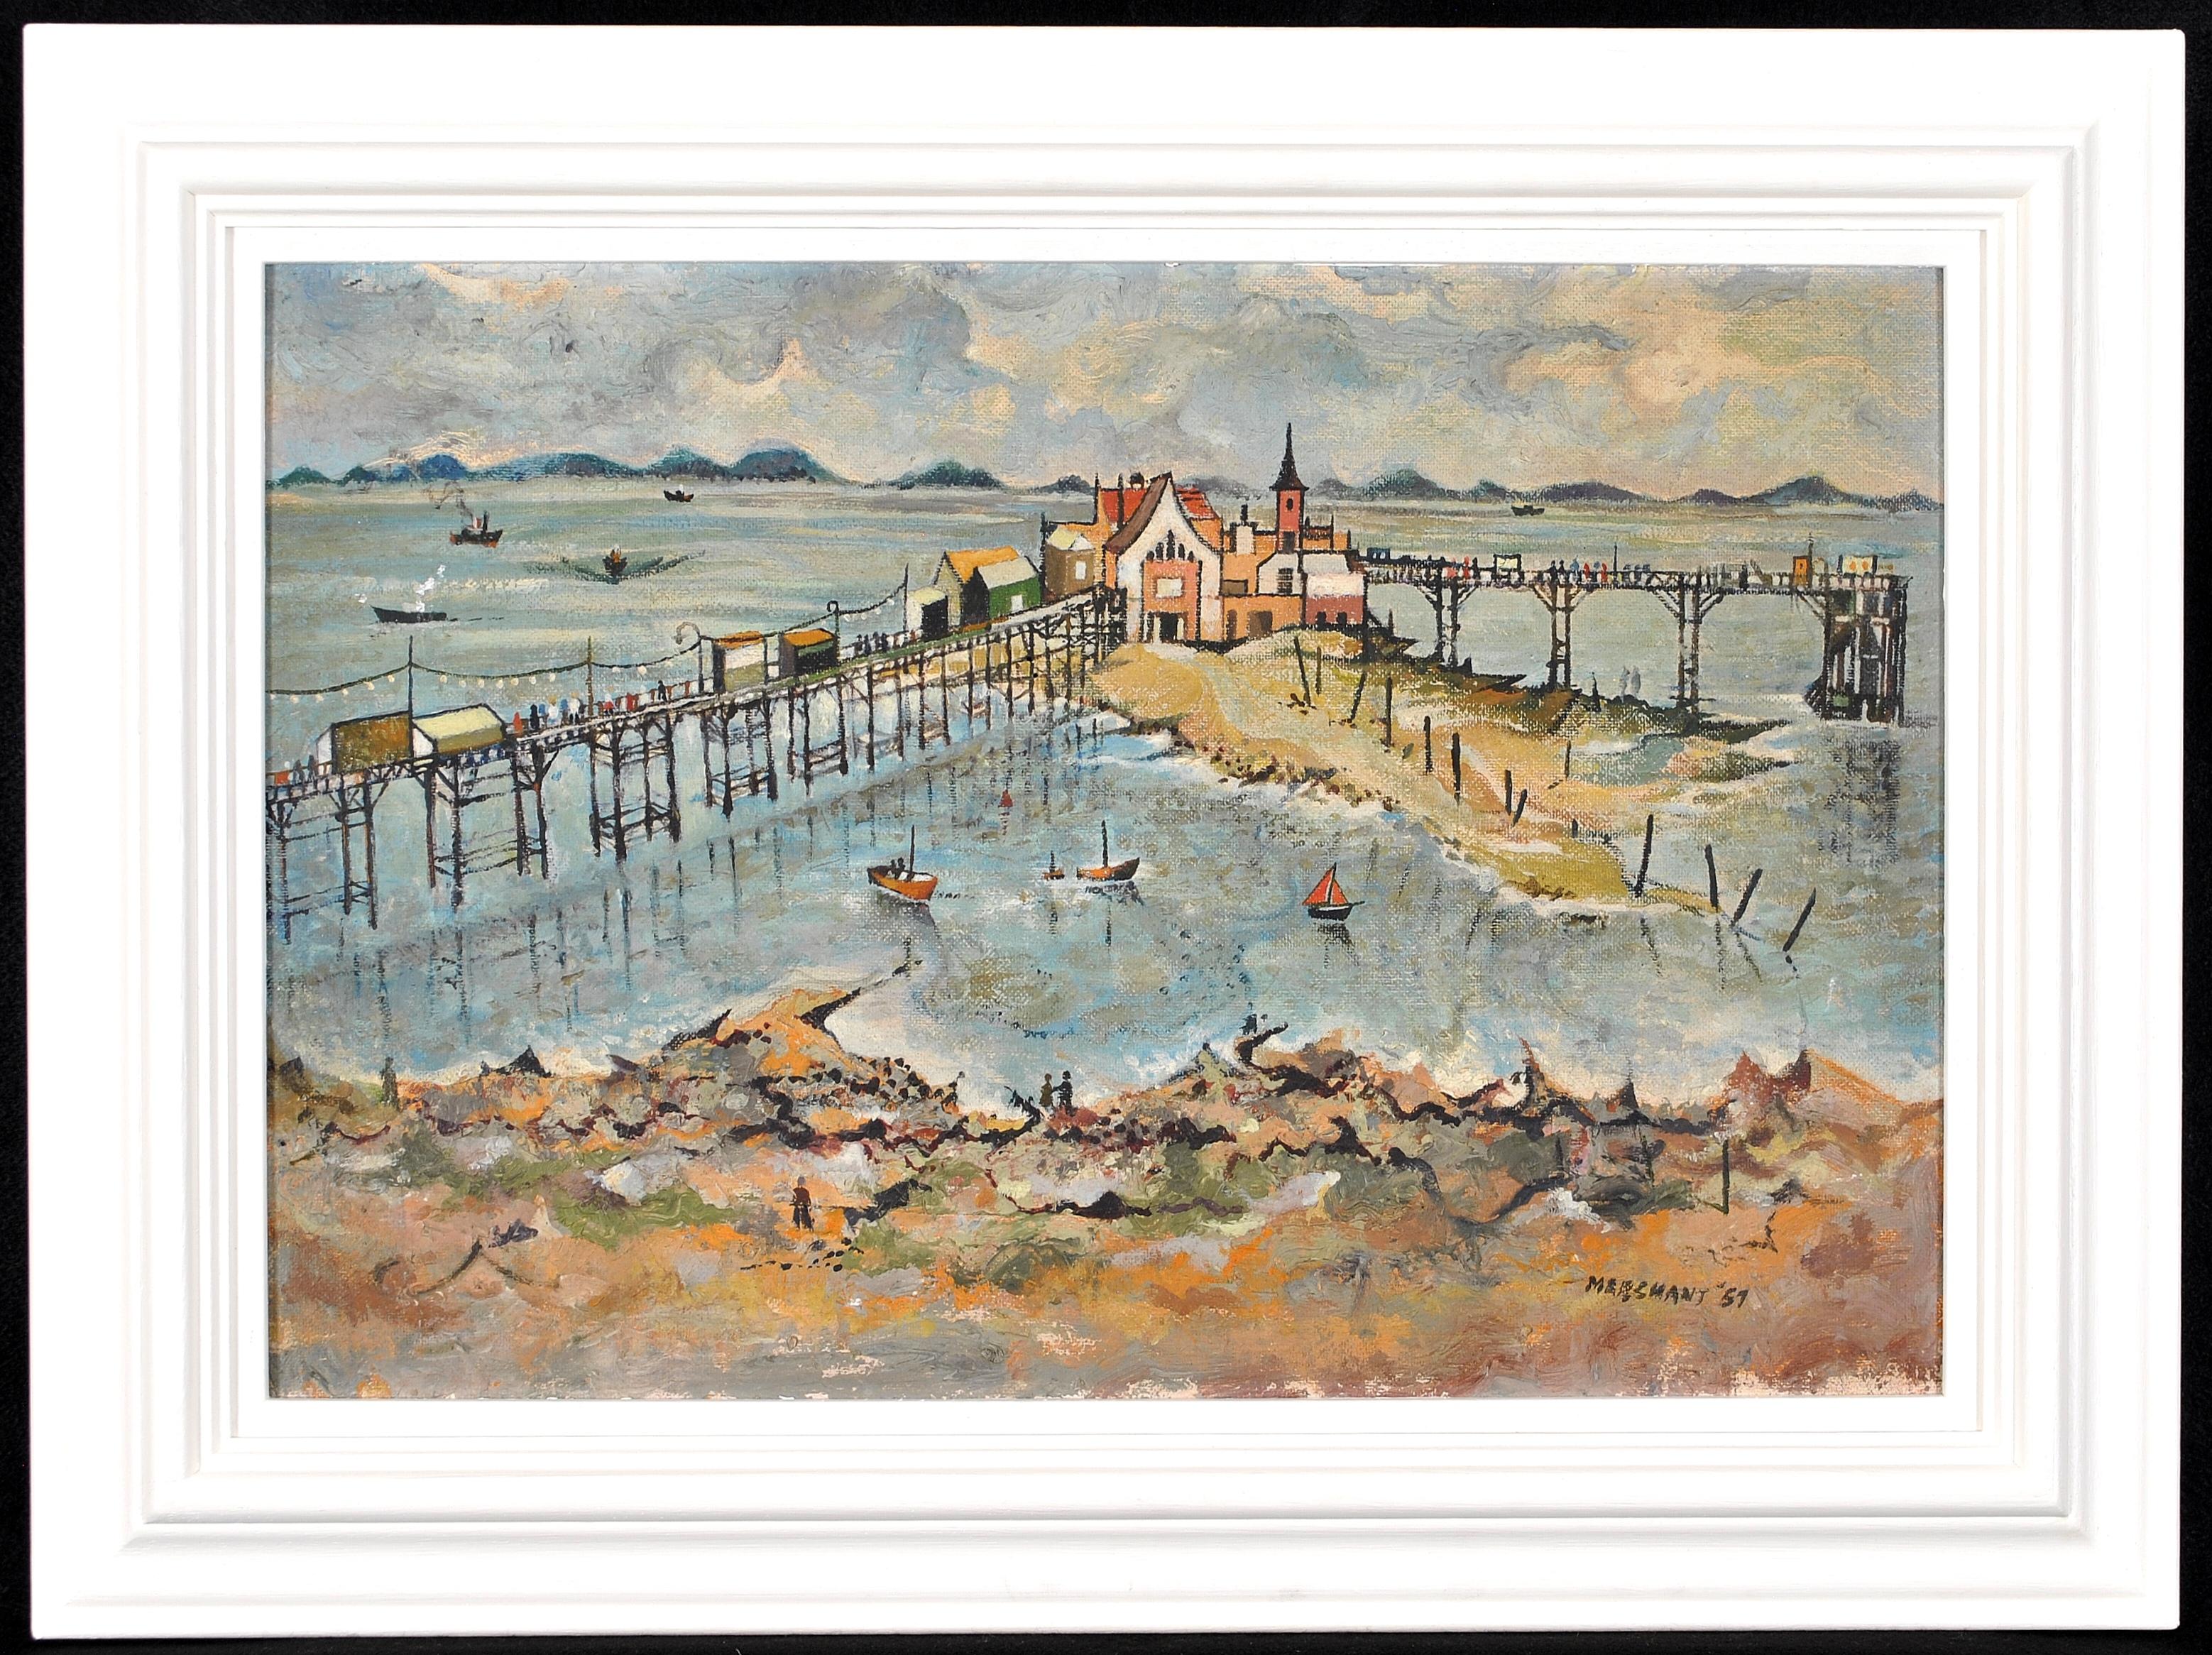 This charming mid 20th century English naive oil on board depicts Birnbeck Pier on the Bristol Channel in Weston-super-Mare.

The grade II listed Victorian pier was designed by Eugenius Birch and opened in 1867. Birnbeck Pier is one of only six